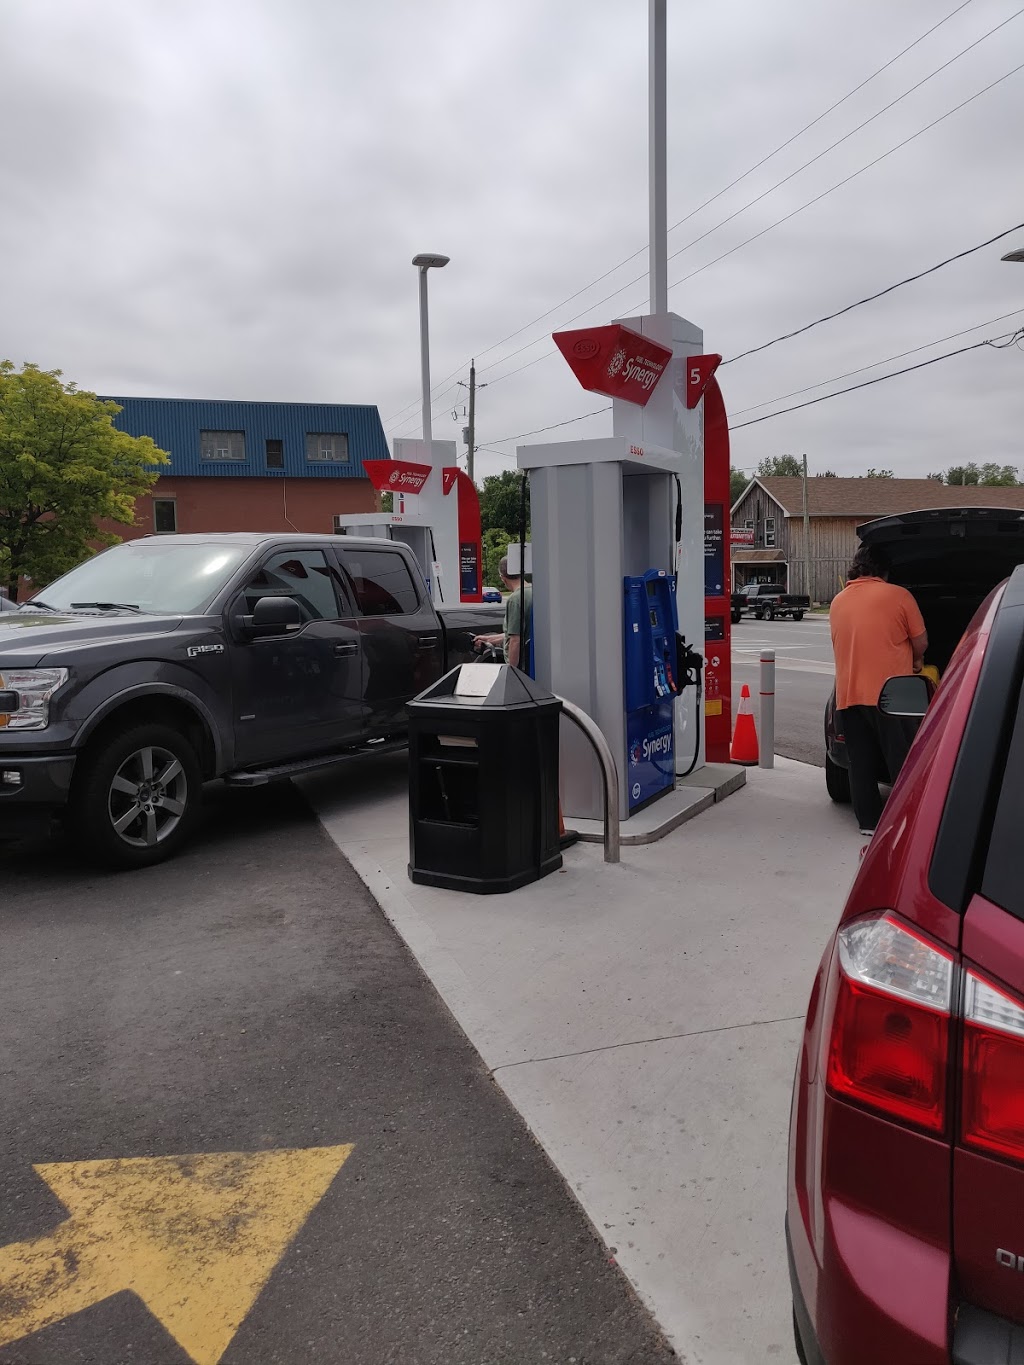 Esso | 15977 AIRPORT RD, Caledon East, ON L7C 1H9, Canada